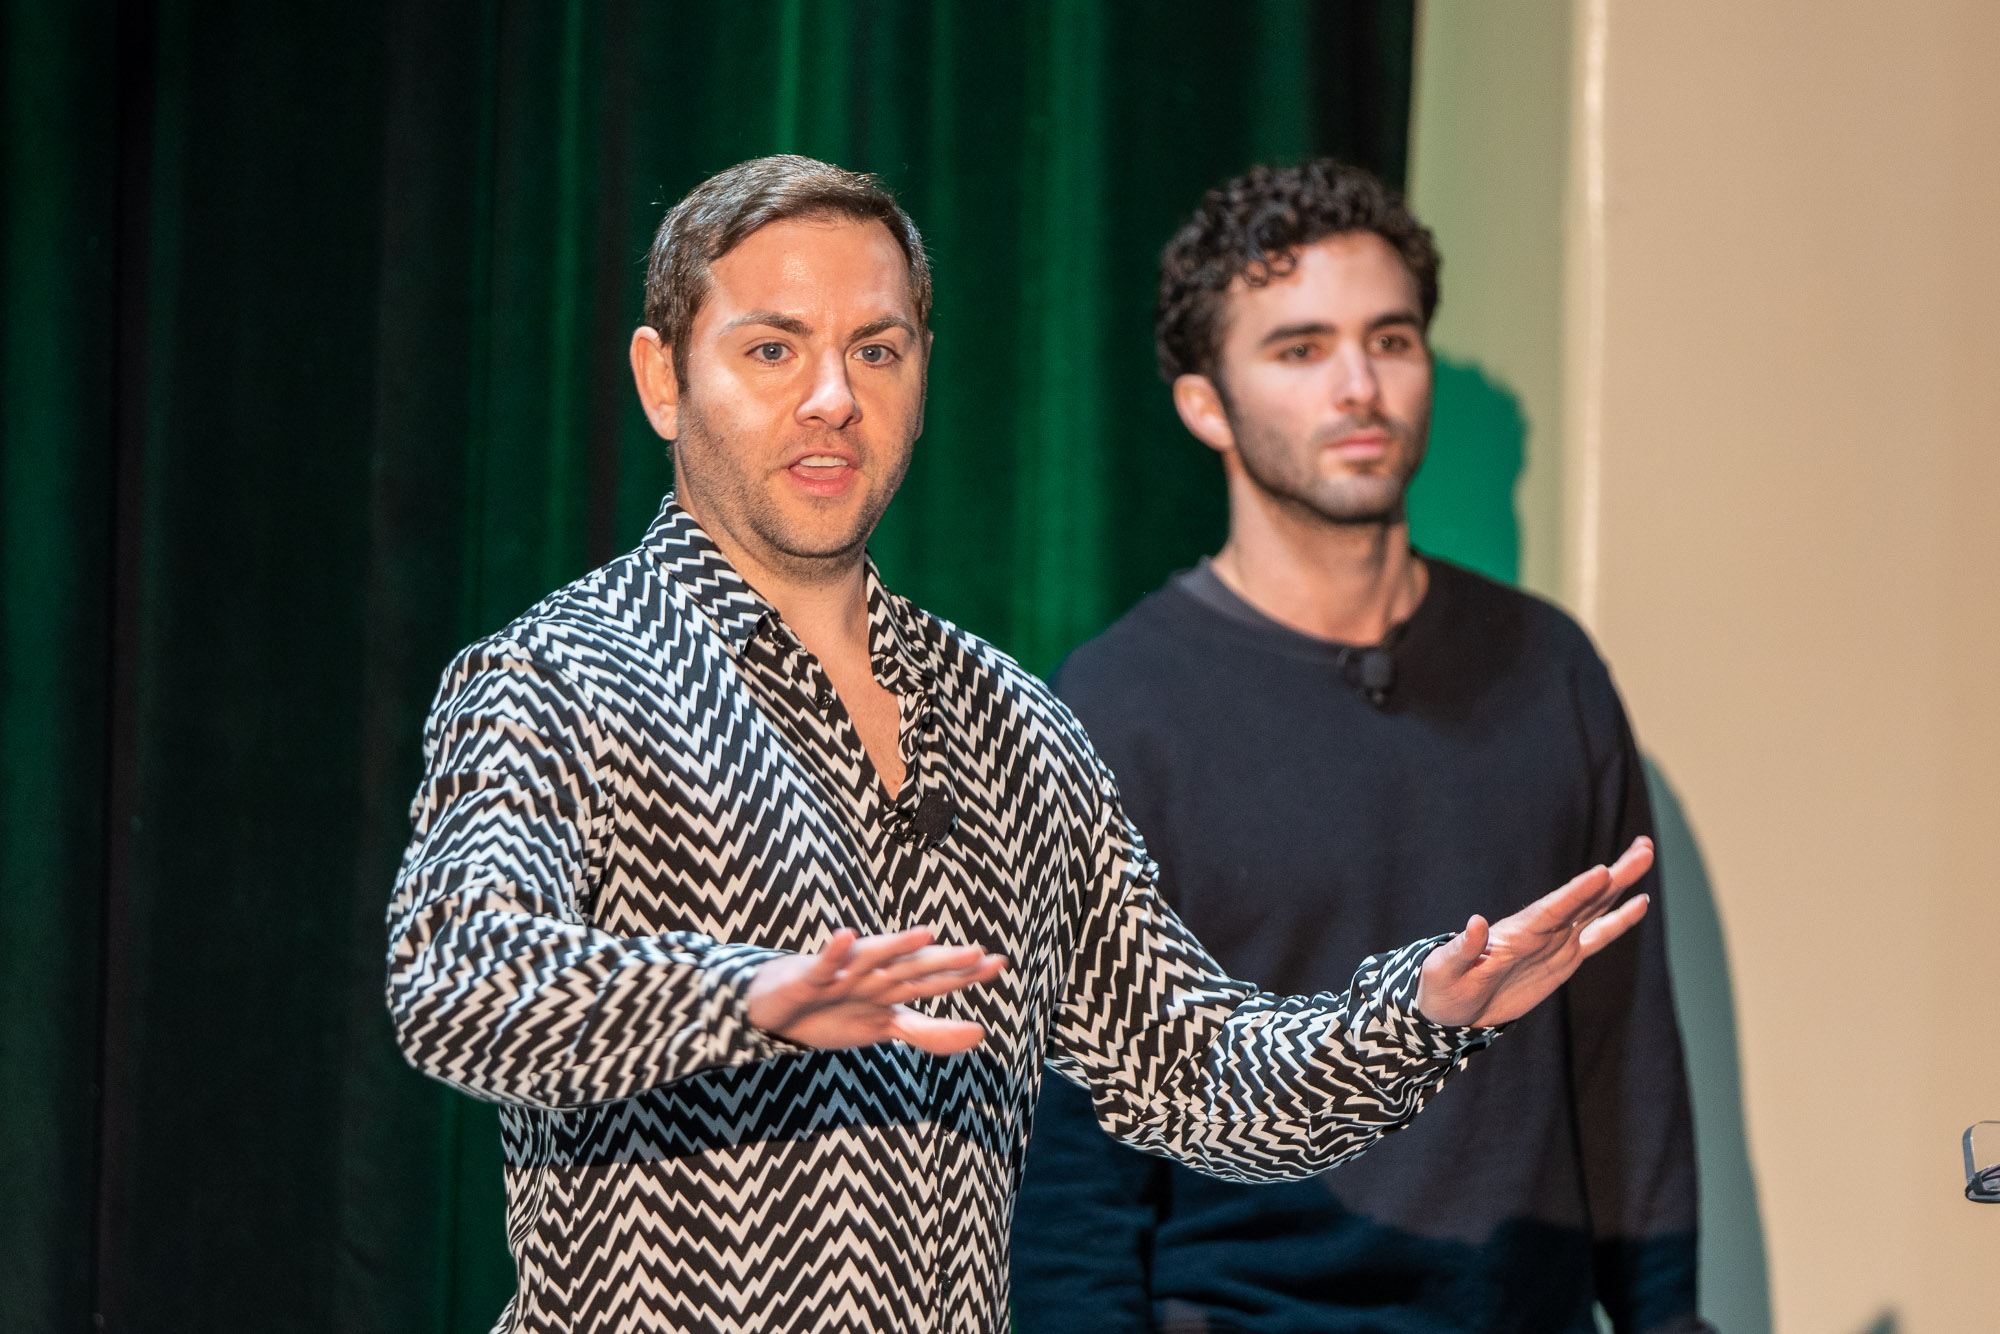 Josh Machiz, Partner at Redpoint, and Rashad Assir, Head of Content at Redpoint, talk about "How To Turn Your Startup into a Social Star" at TechCrunch Early Stage in Boston on April 20, 2023. Image Credits: Haje Jan Kamps / TechCrunch